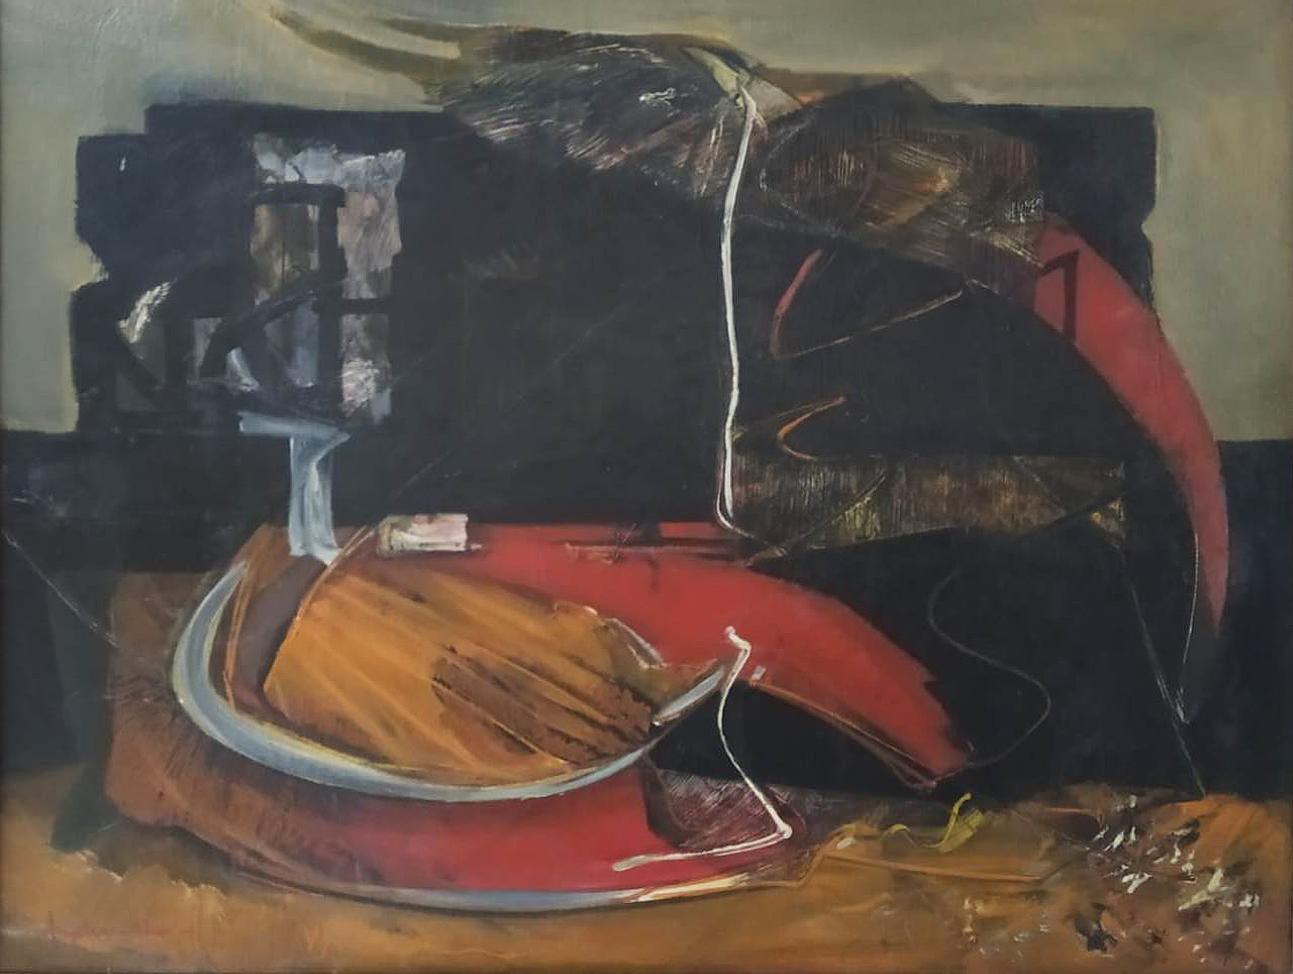 Amitava Dhar Abstract Painting - Untitled, Oil on Canvas, Red, Black by Contemporary Indian Artist "In Stock"